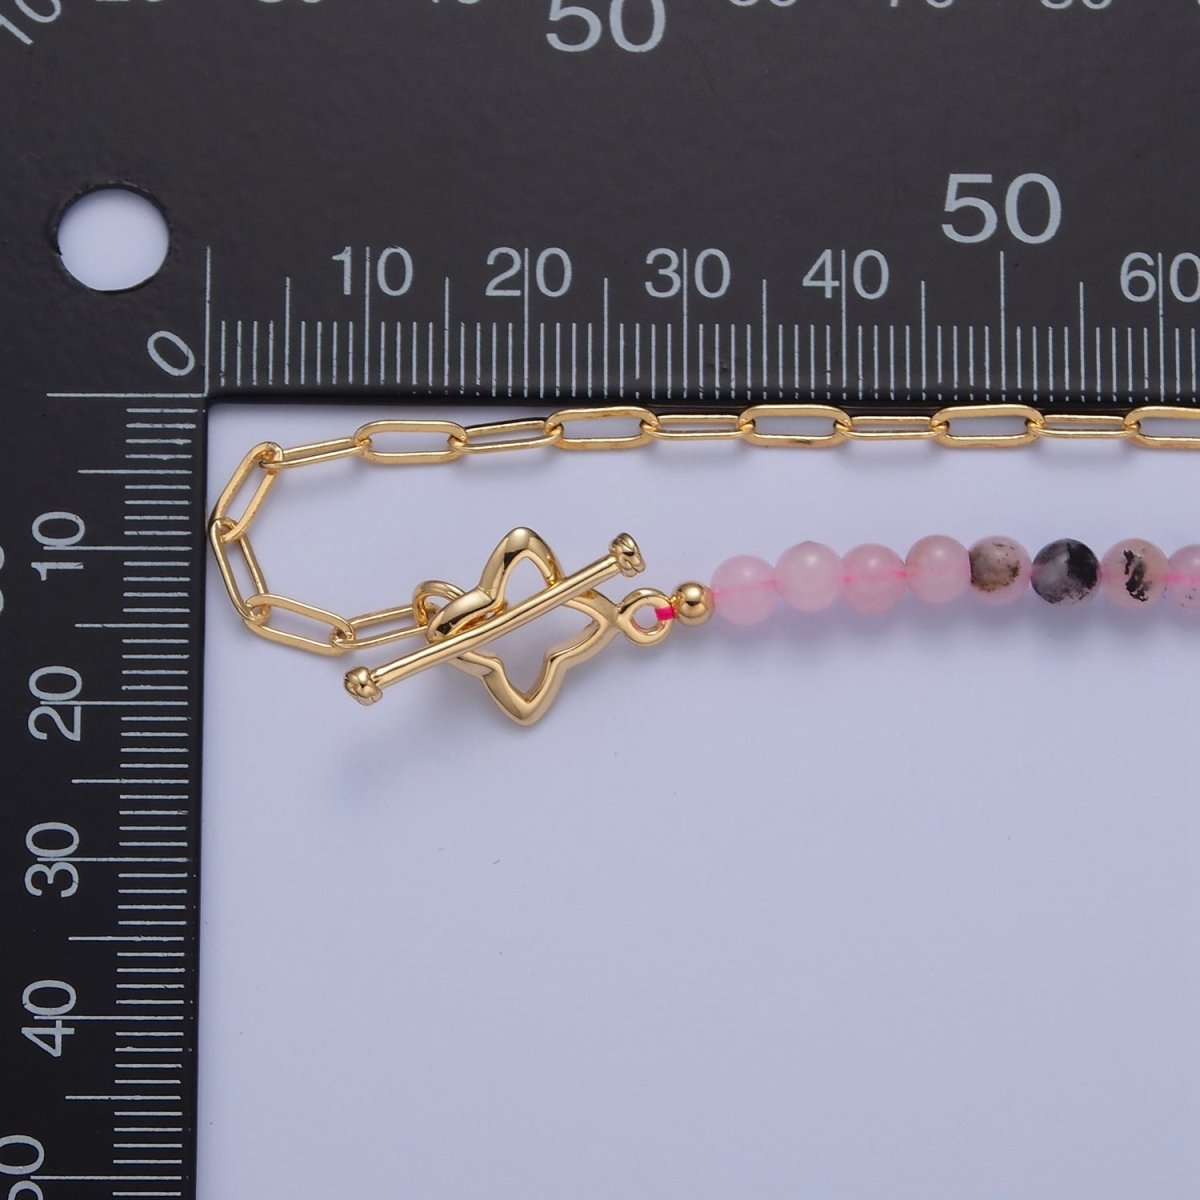 Dainty Half Bead Half Link Chain Necklace, 24k Gold Filled Paperclip Chain with Pink Jade Necklace Toggle Clasp | WA-972 Clearance Pricing - DLUXCA